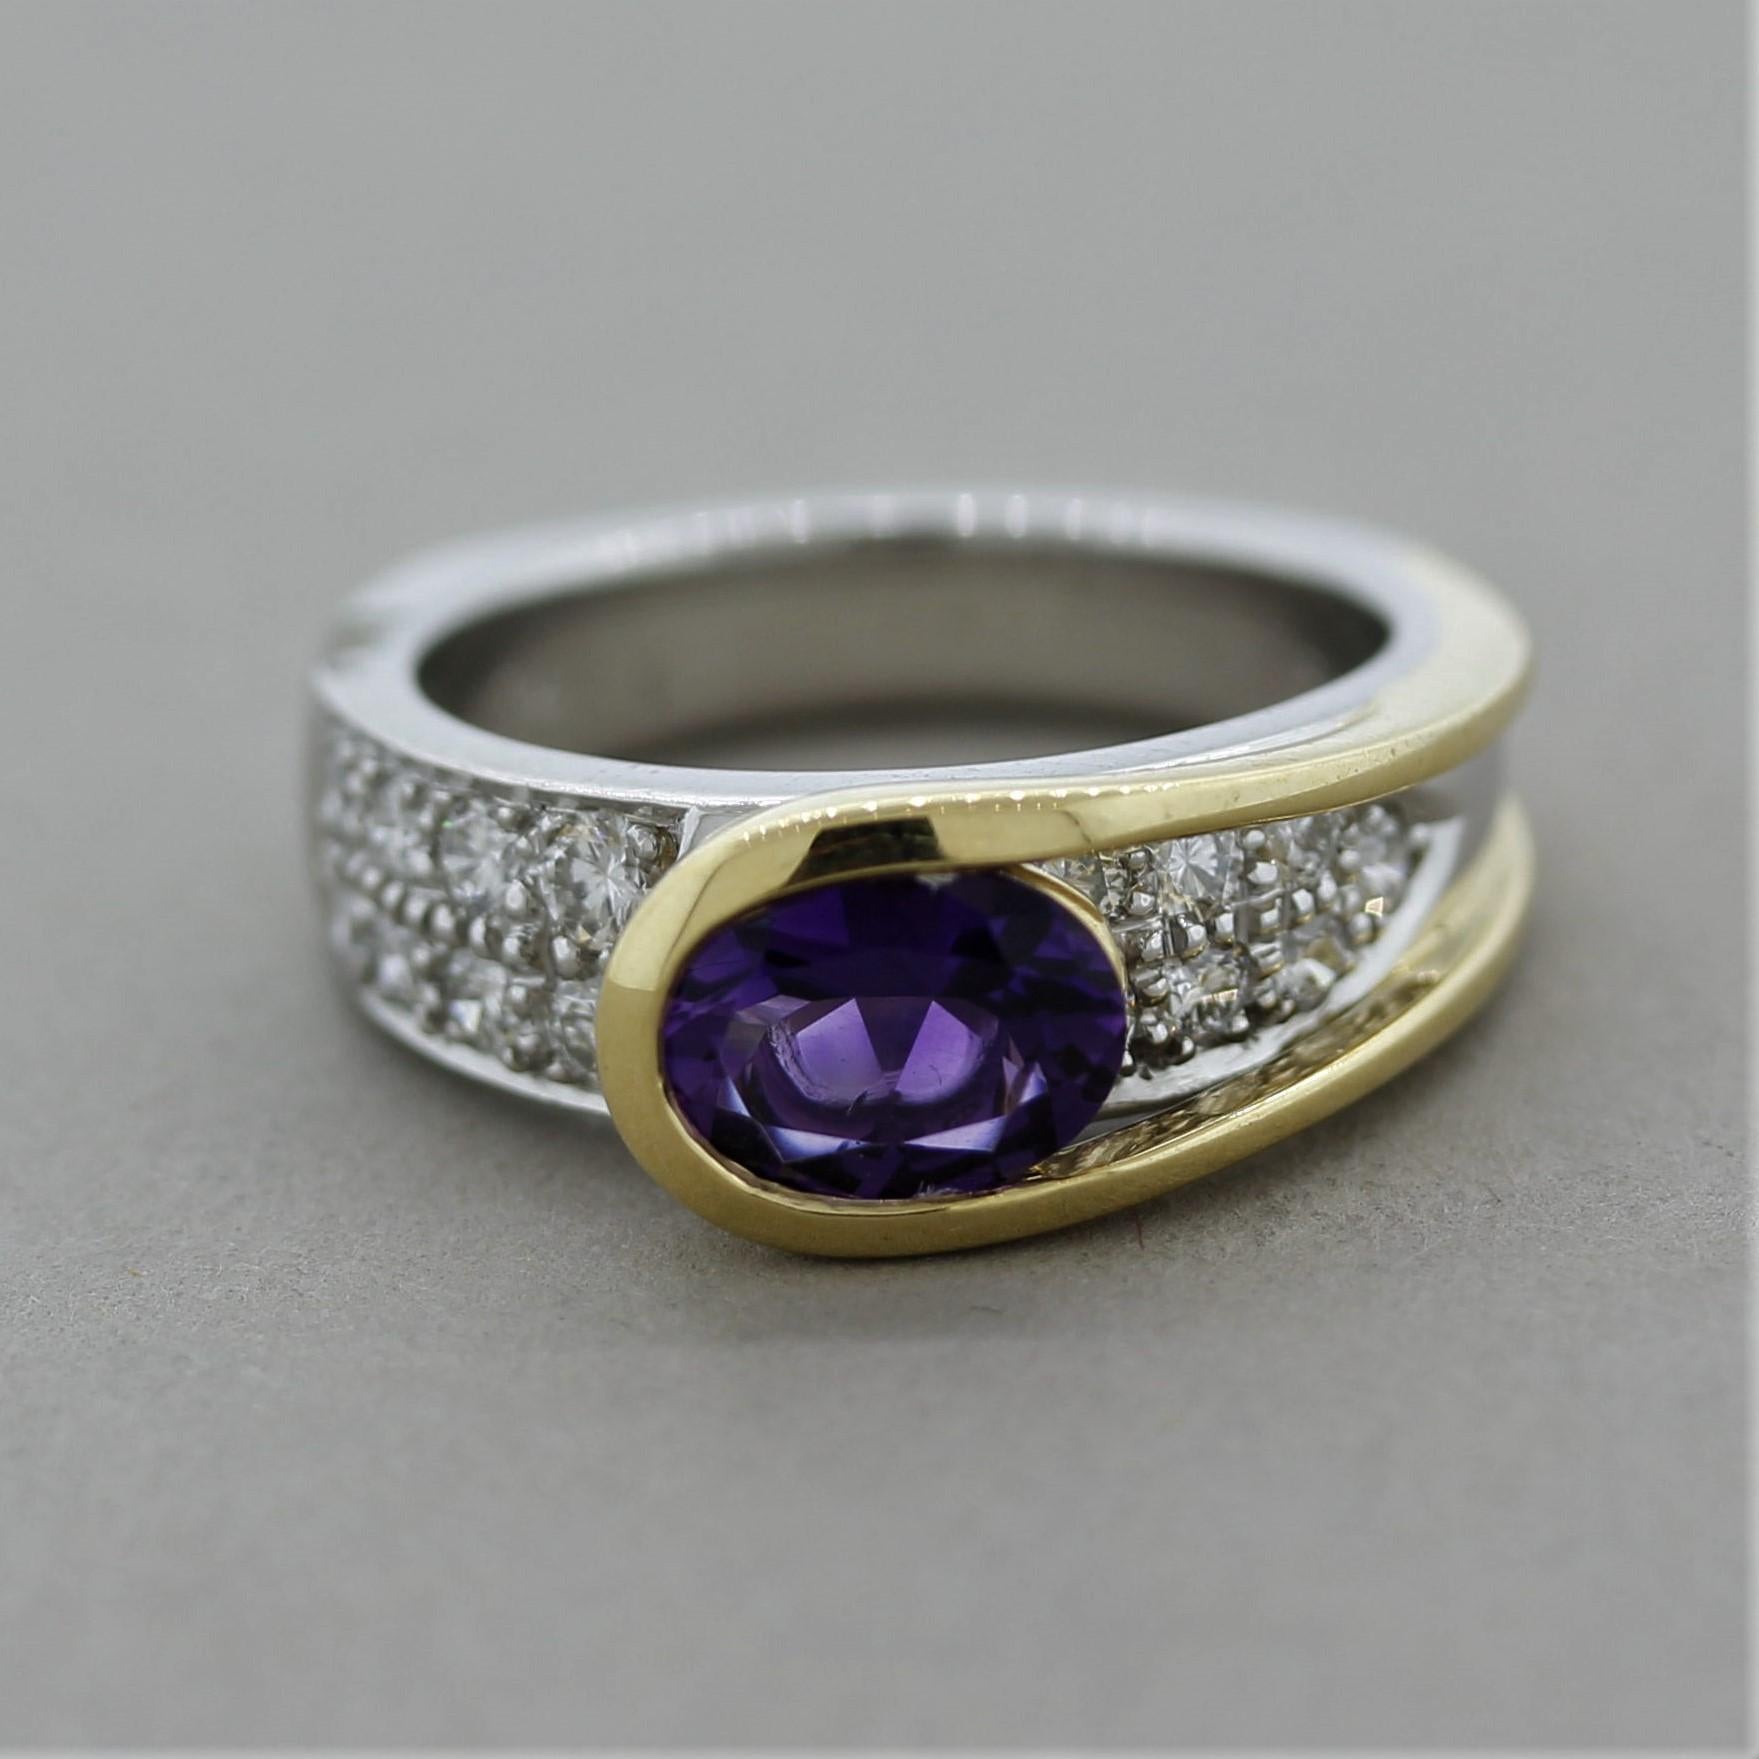 A stylish modern designed ring featuring an oval shaped amethyst weighing 1.02 carats and set in 18k yellow gold. It is accented by 0.61 carats of round brilliant-cut diamonds set below the amethyst in platinum. The two-toned design, combining